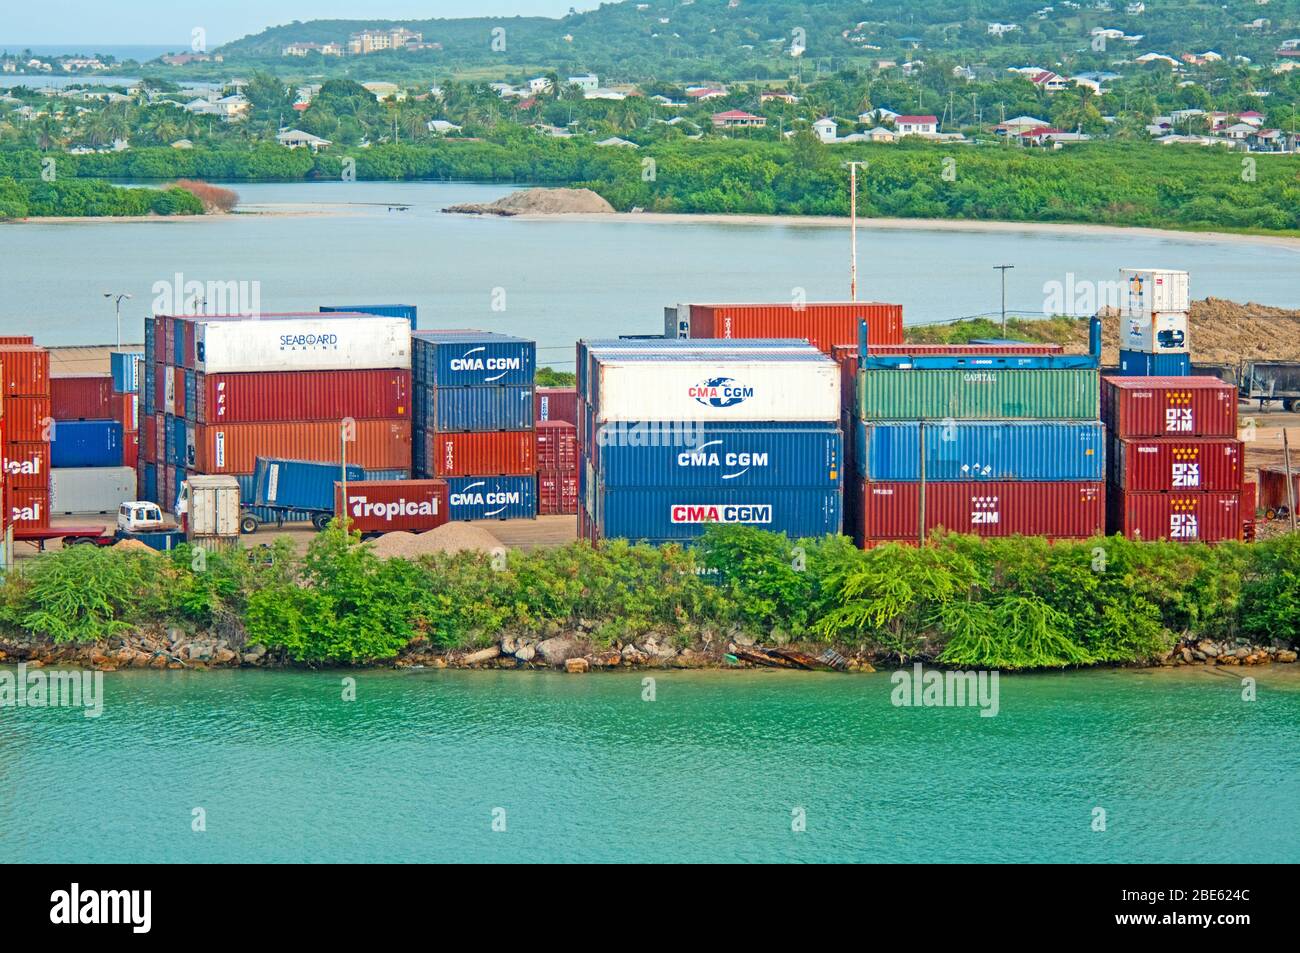 Antigua, St Johns Harbour, Caribbean, West Indies, Heritage Quay, Containers on Key Side, Stock Photo